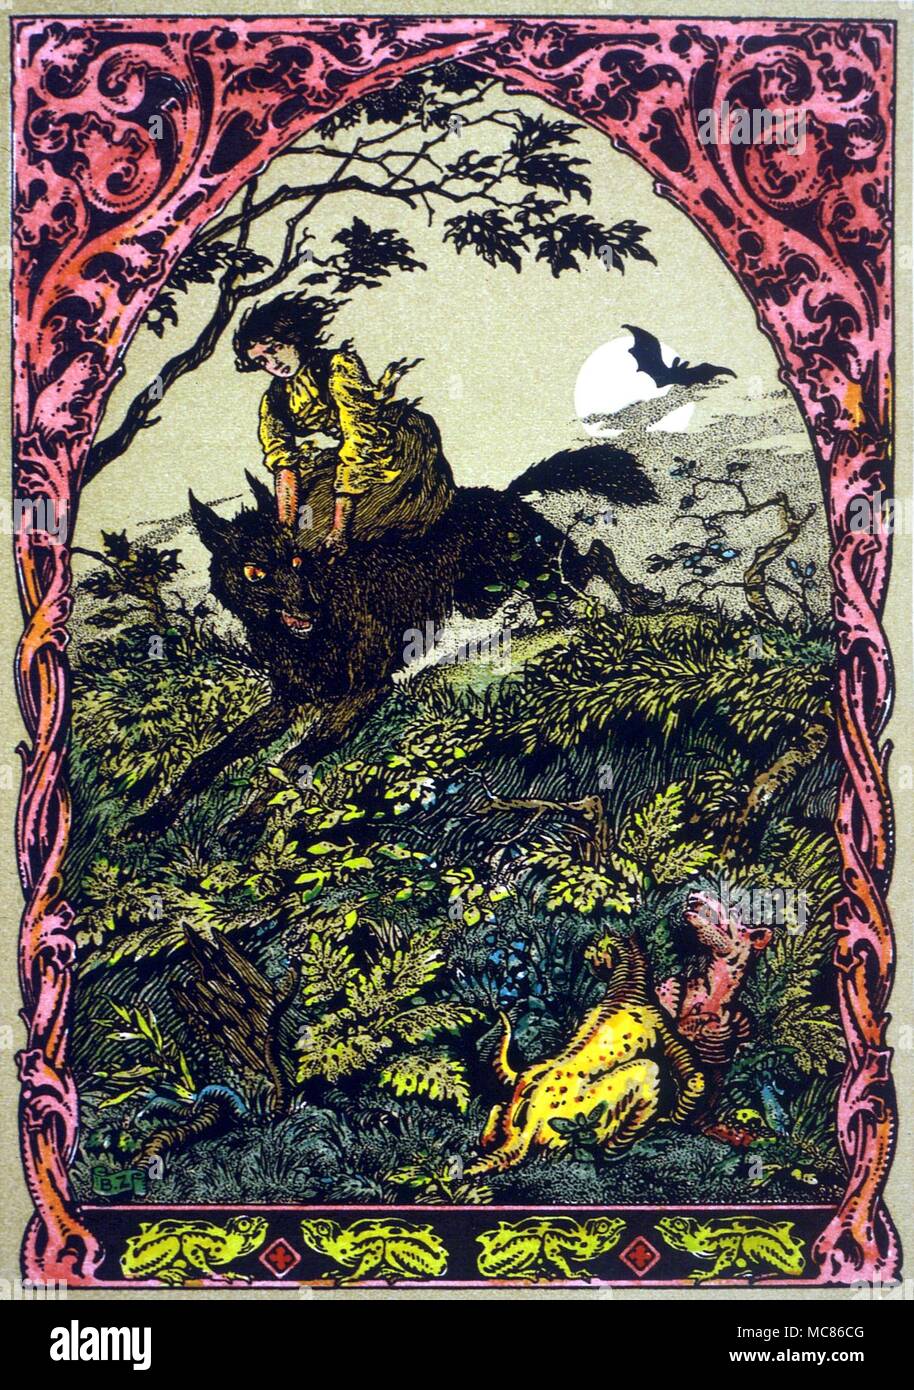 WITCHCRAFT Black dog ridden by witch Night ride of the witch, Babin. design by Bernard Zuber, to M. Carron's 'La Vie Execrable de Guillemette Babin, Sorciere, 1926 - a true story based on Bodin's book 'Demonomanie', 1580. This 17th century witch was burned to death at Poitiers, 1564 Stock Photo